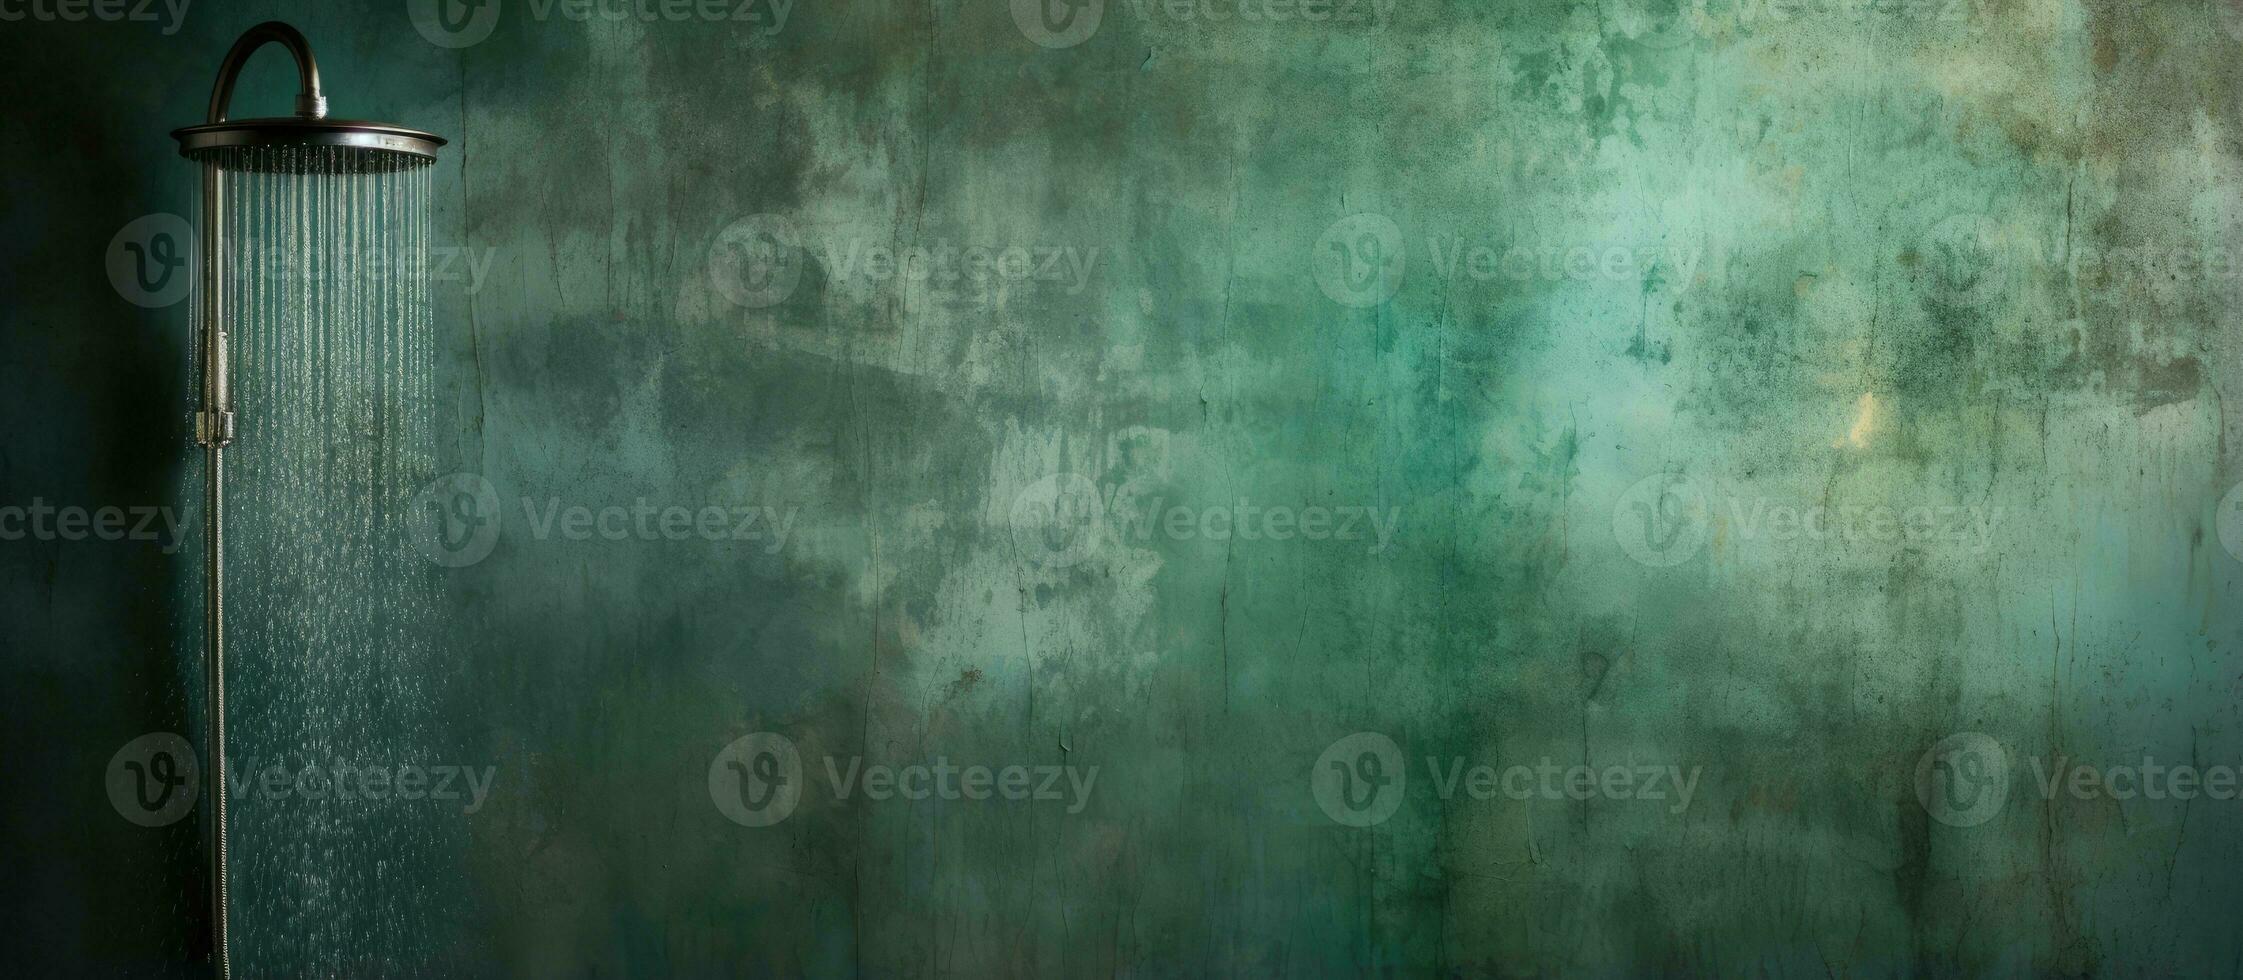 Green rusty grunge bathroom background with water flowing from the shower head photo